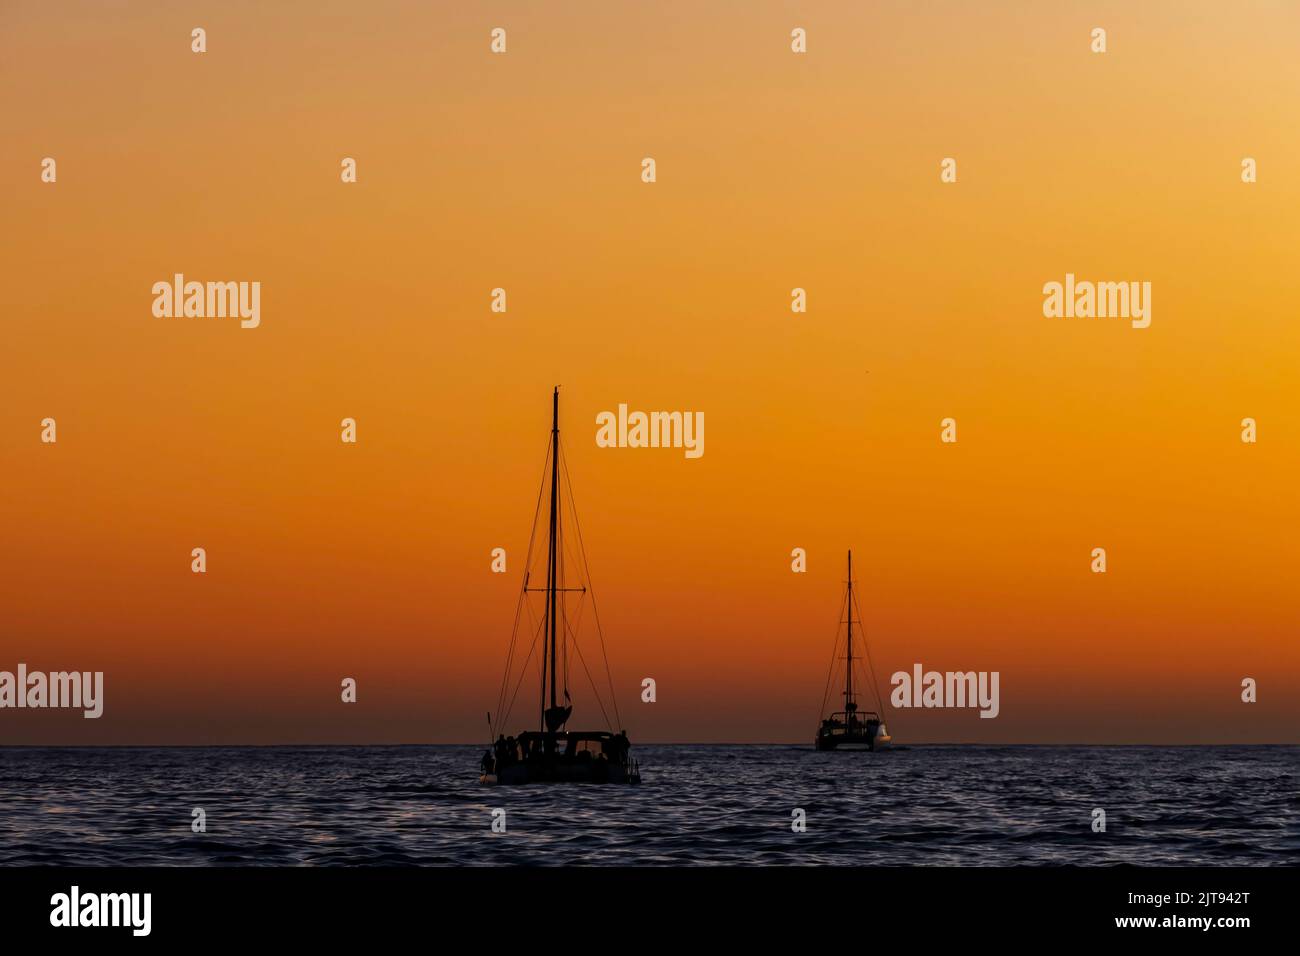 Sea yachts against the background of the sun reflected in the waves Stock Photo